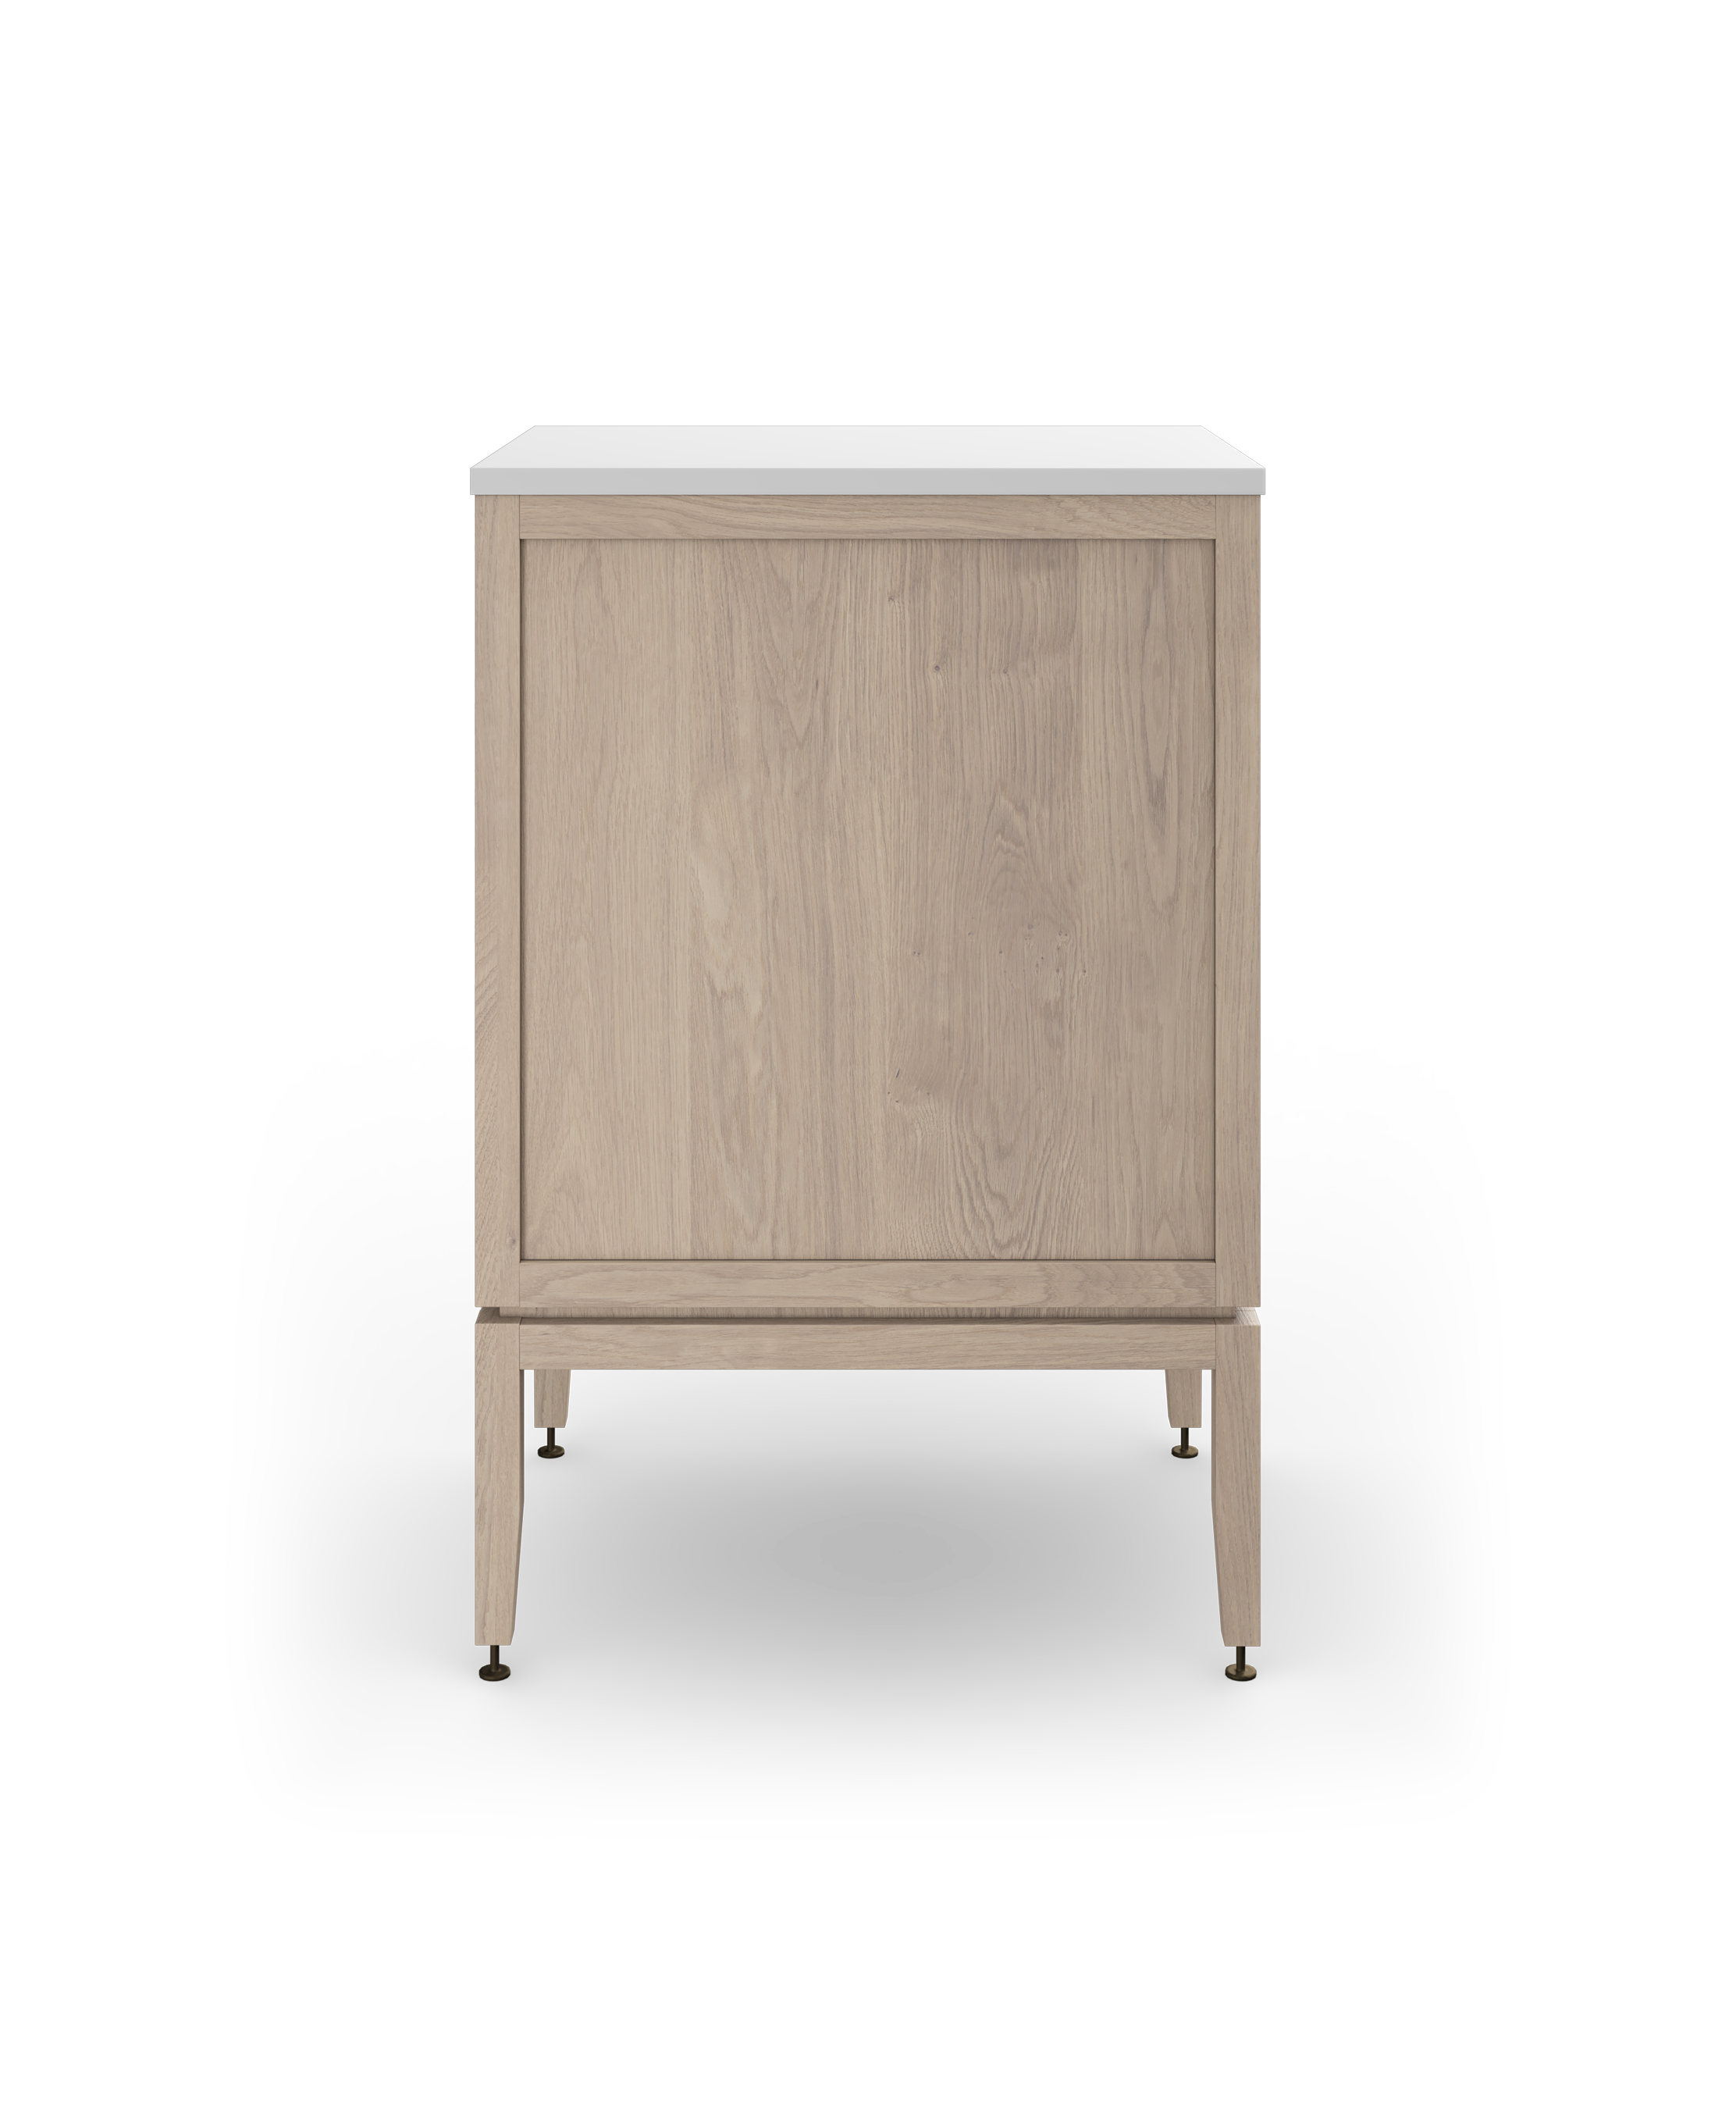 Coquo modular bathroom vanity with three drawers in white stained oak. 